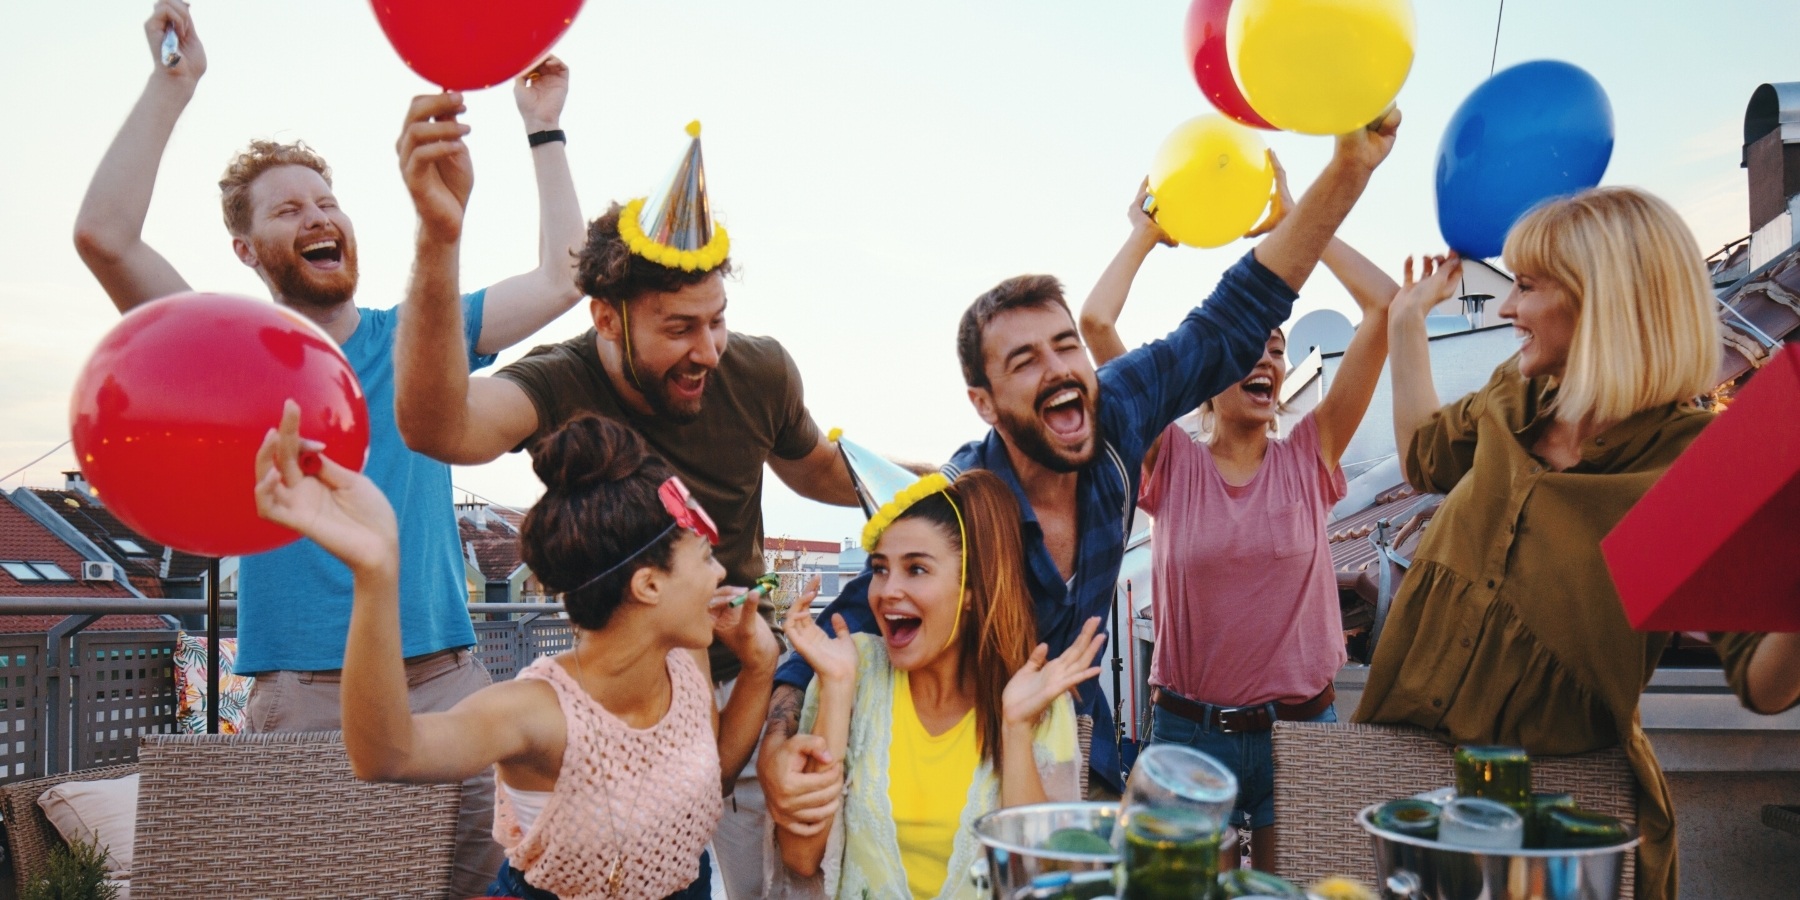 How To Plan A Surprise Birthday Party – The Mixer's Guide